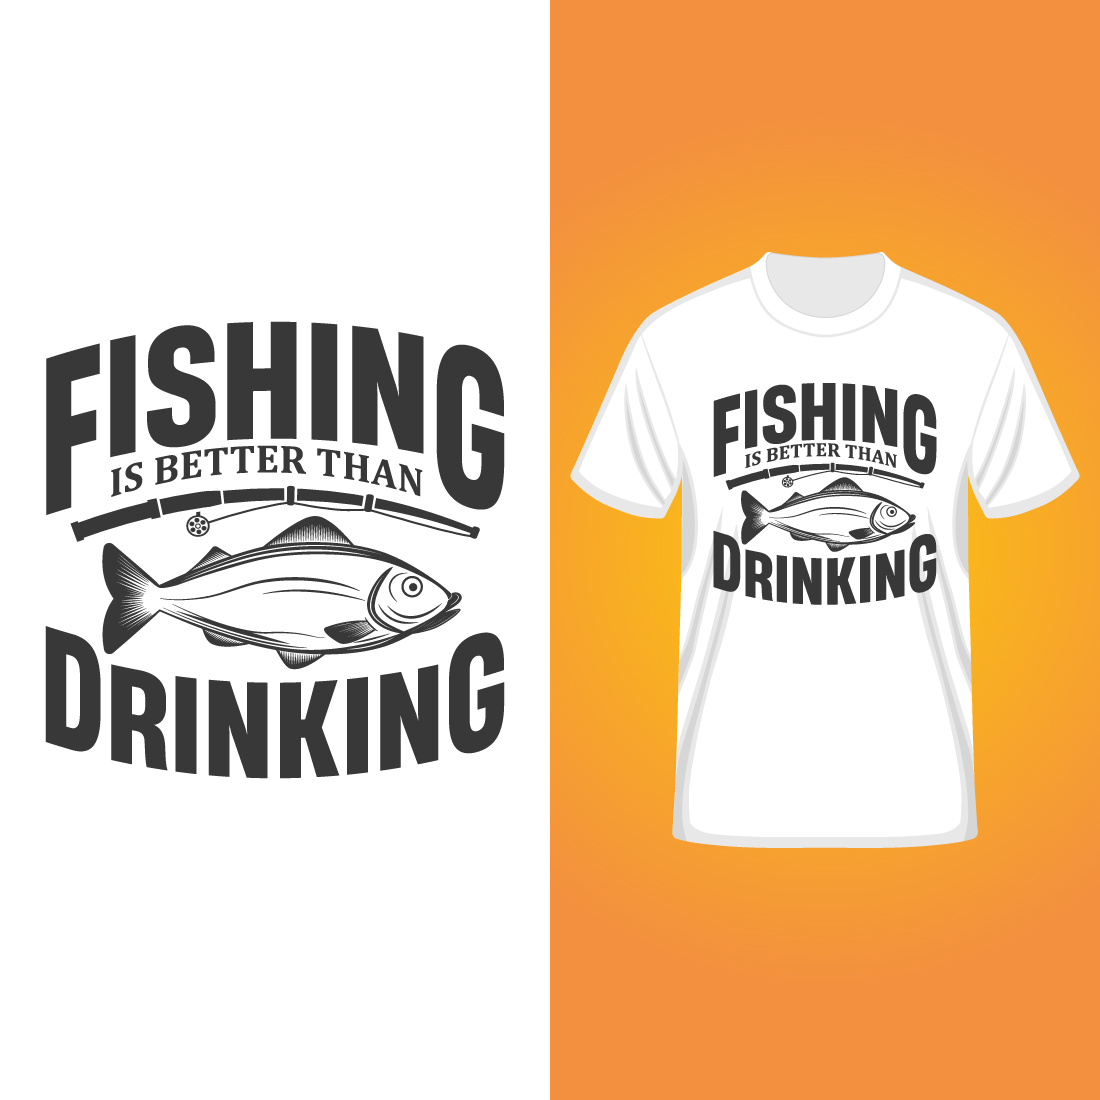 Fishing Typography T-Shirt Design cover image.